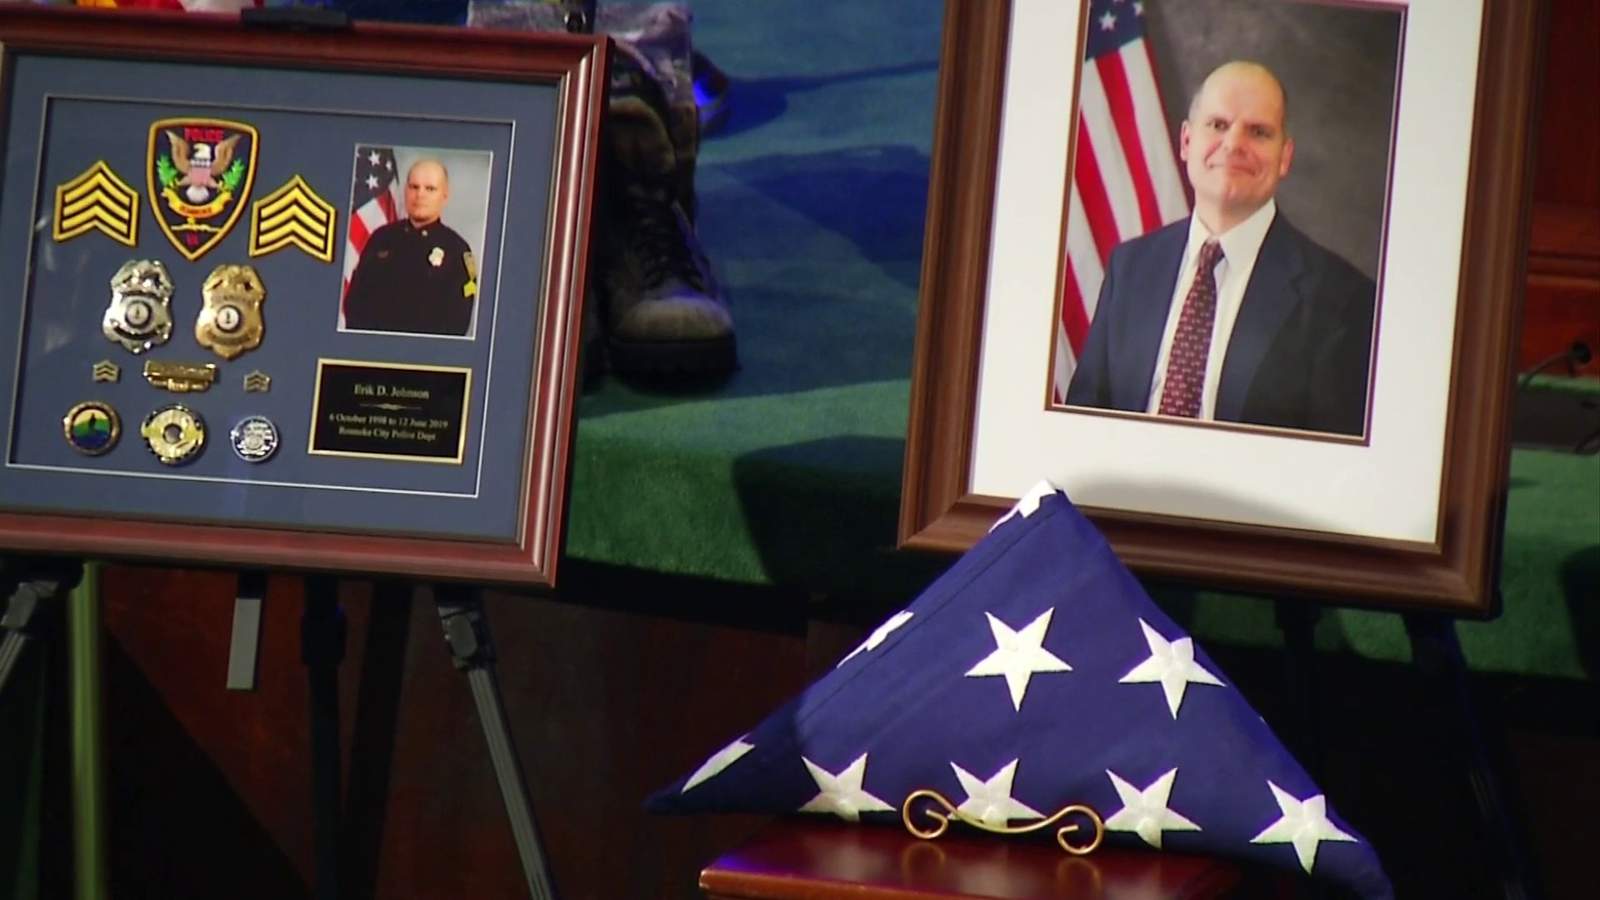 ’A compassionate, fun-loving individual’: Roanoke police sergeant laid to rest after death from brain cancer